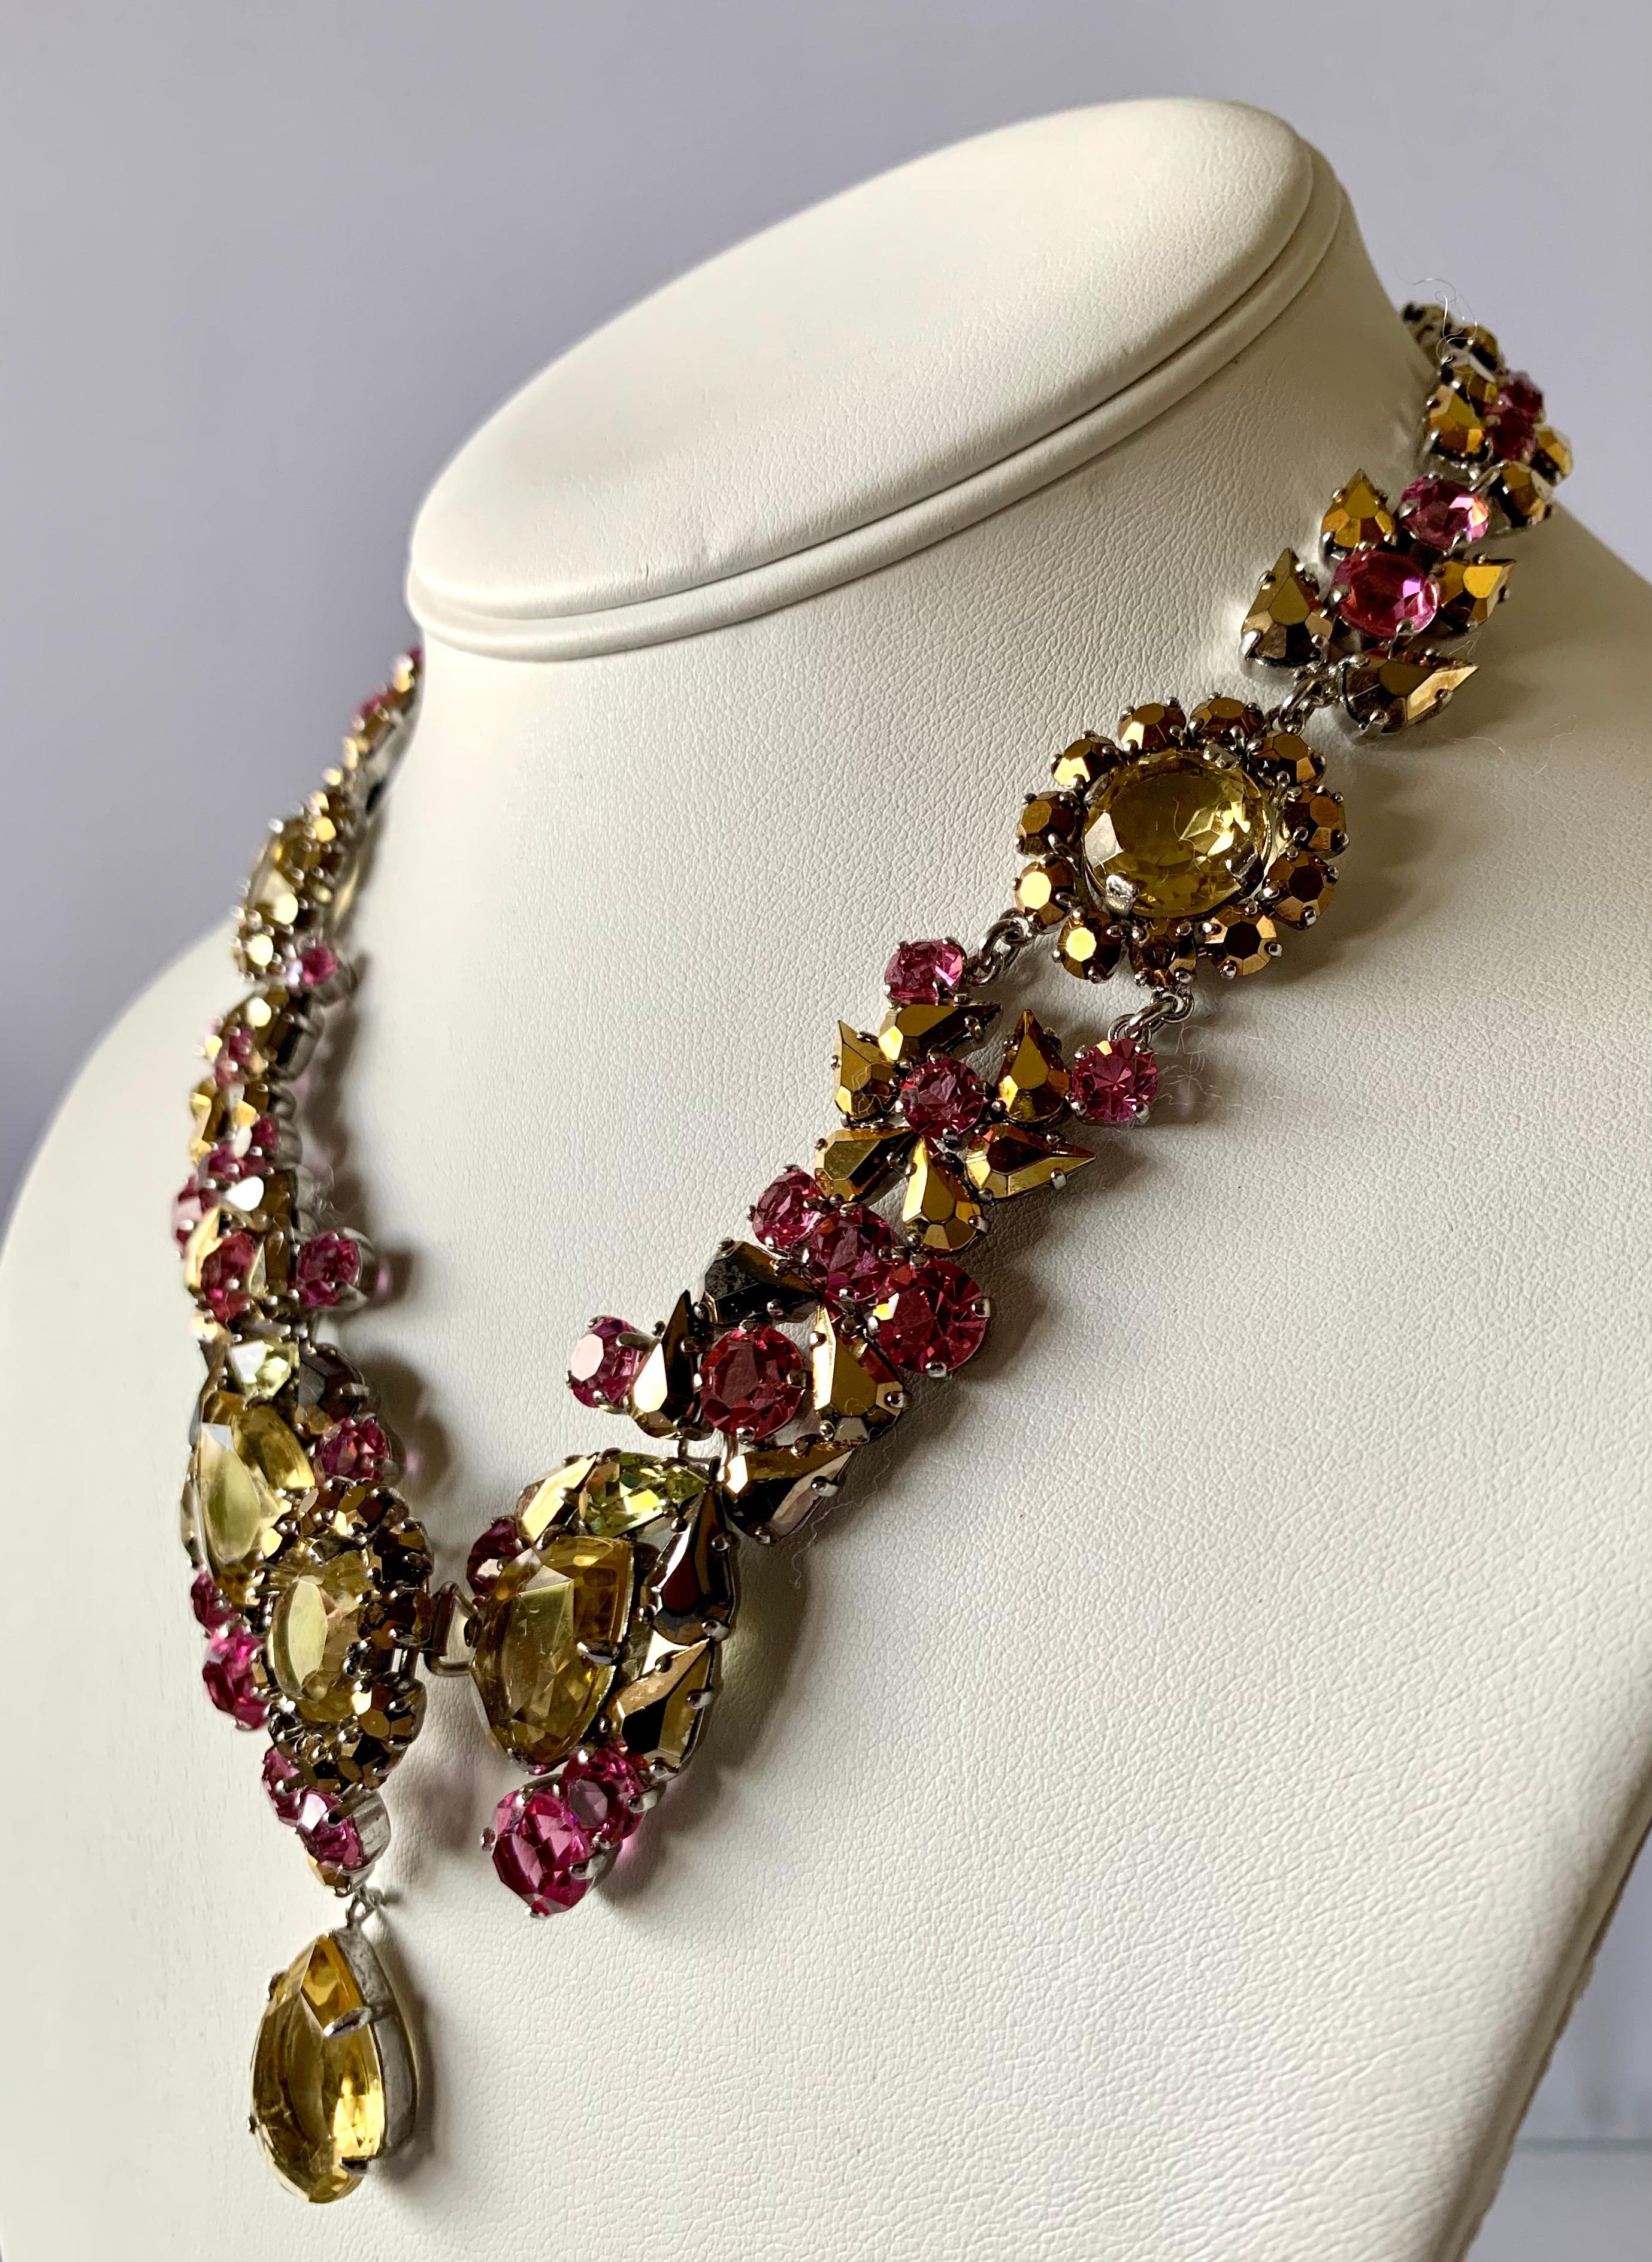 Exquisite vintage Christian Dior necklace, comprised out of silver-tome metal the necklace features a romantic design with large prong-set faceted citrine, gold, and pink rhinestones - the necklace is signed Christian Dior 1958.

What makes this